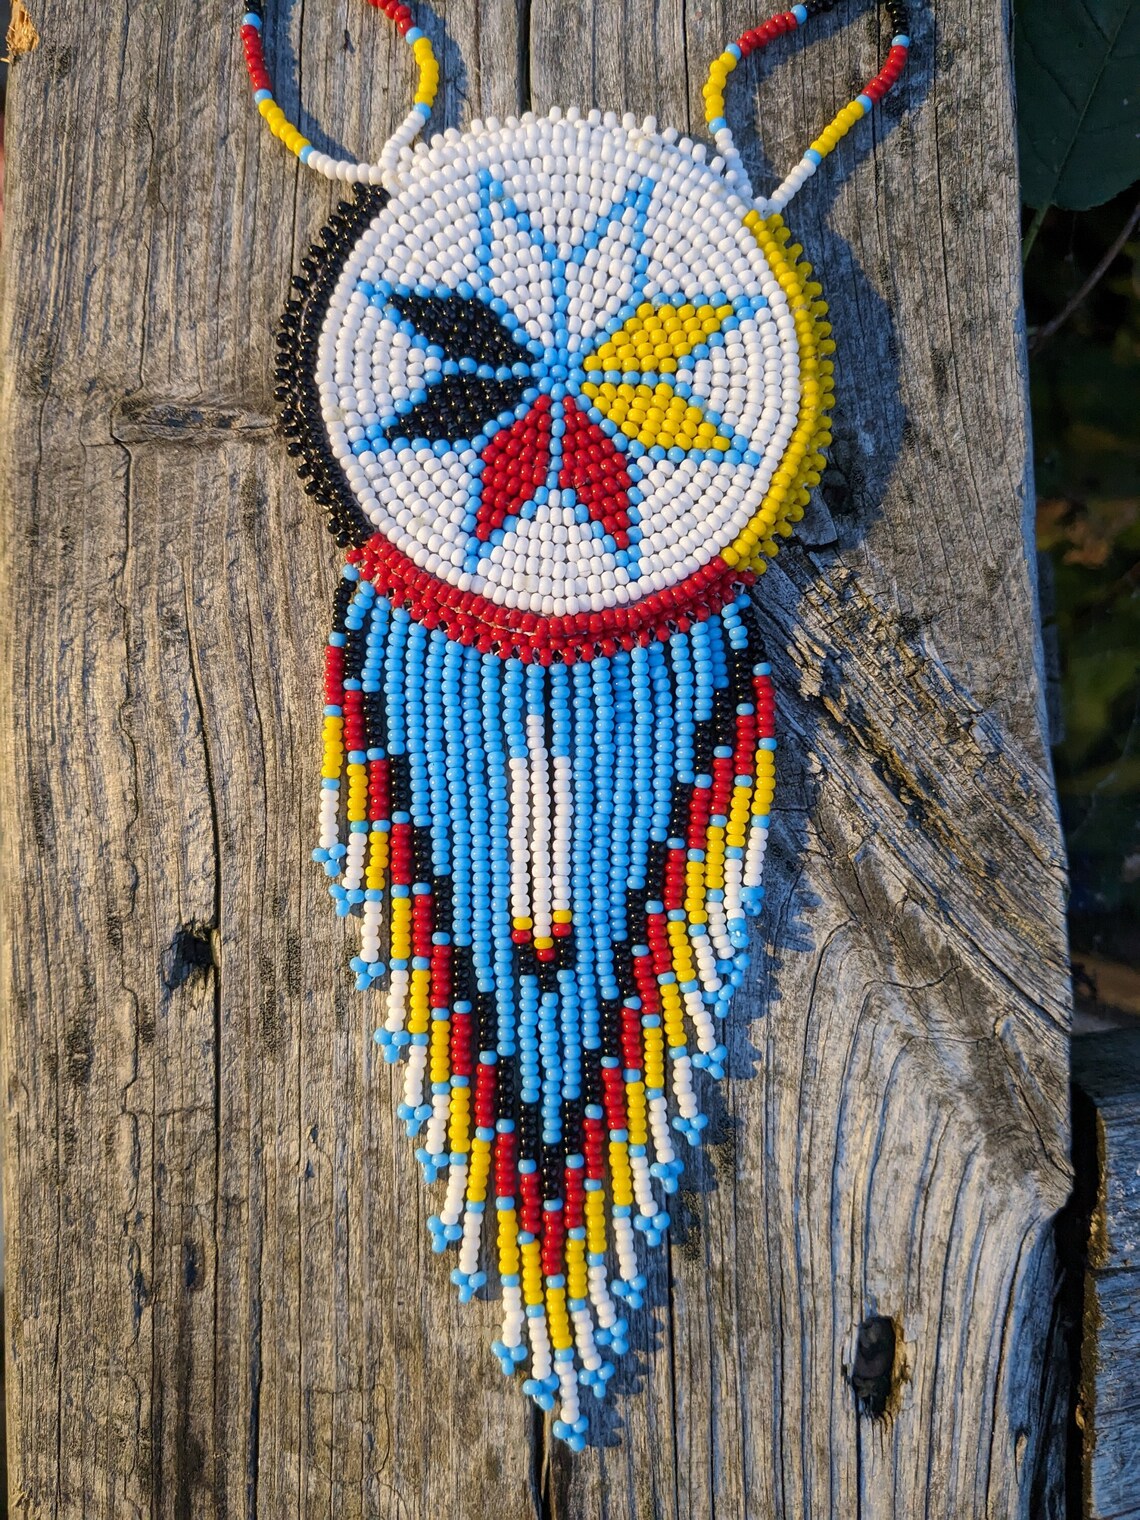 First Nations' beaded jewelry